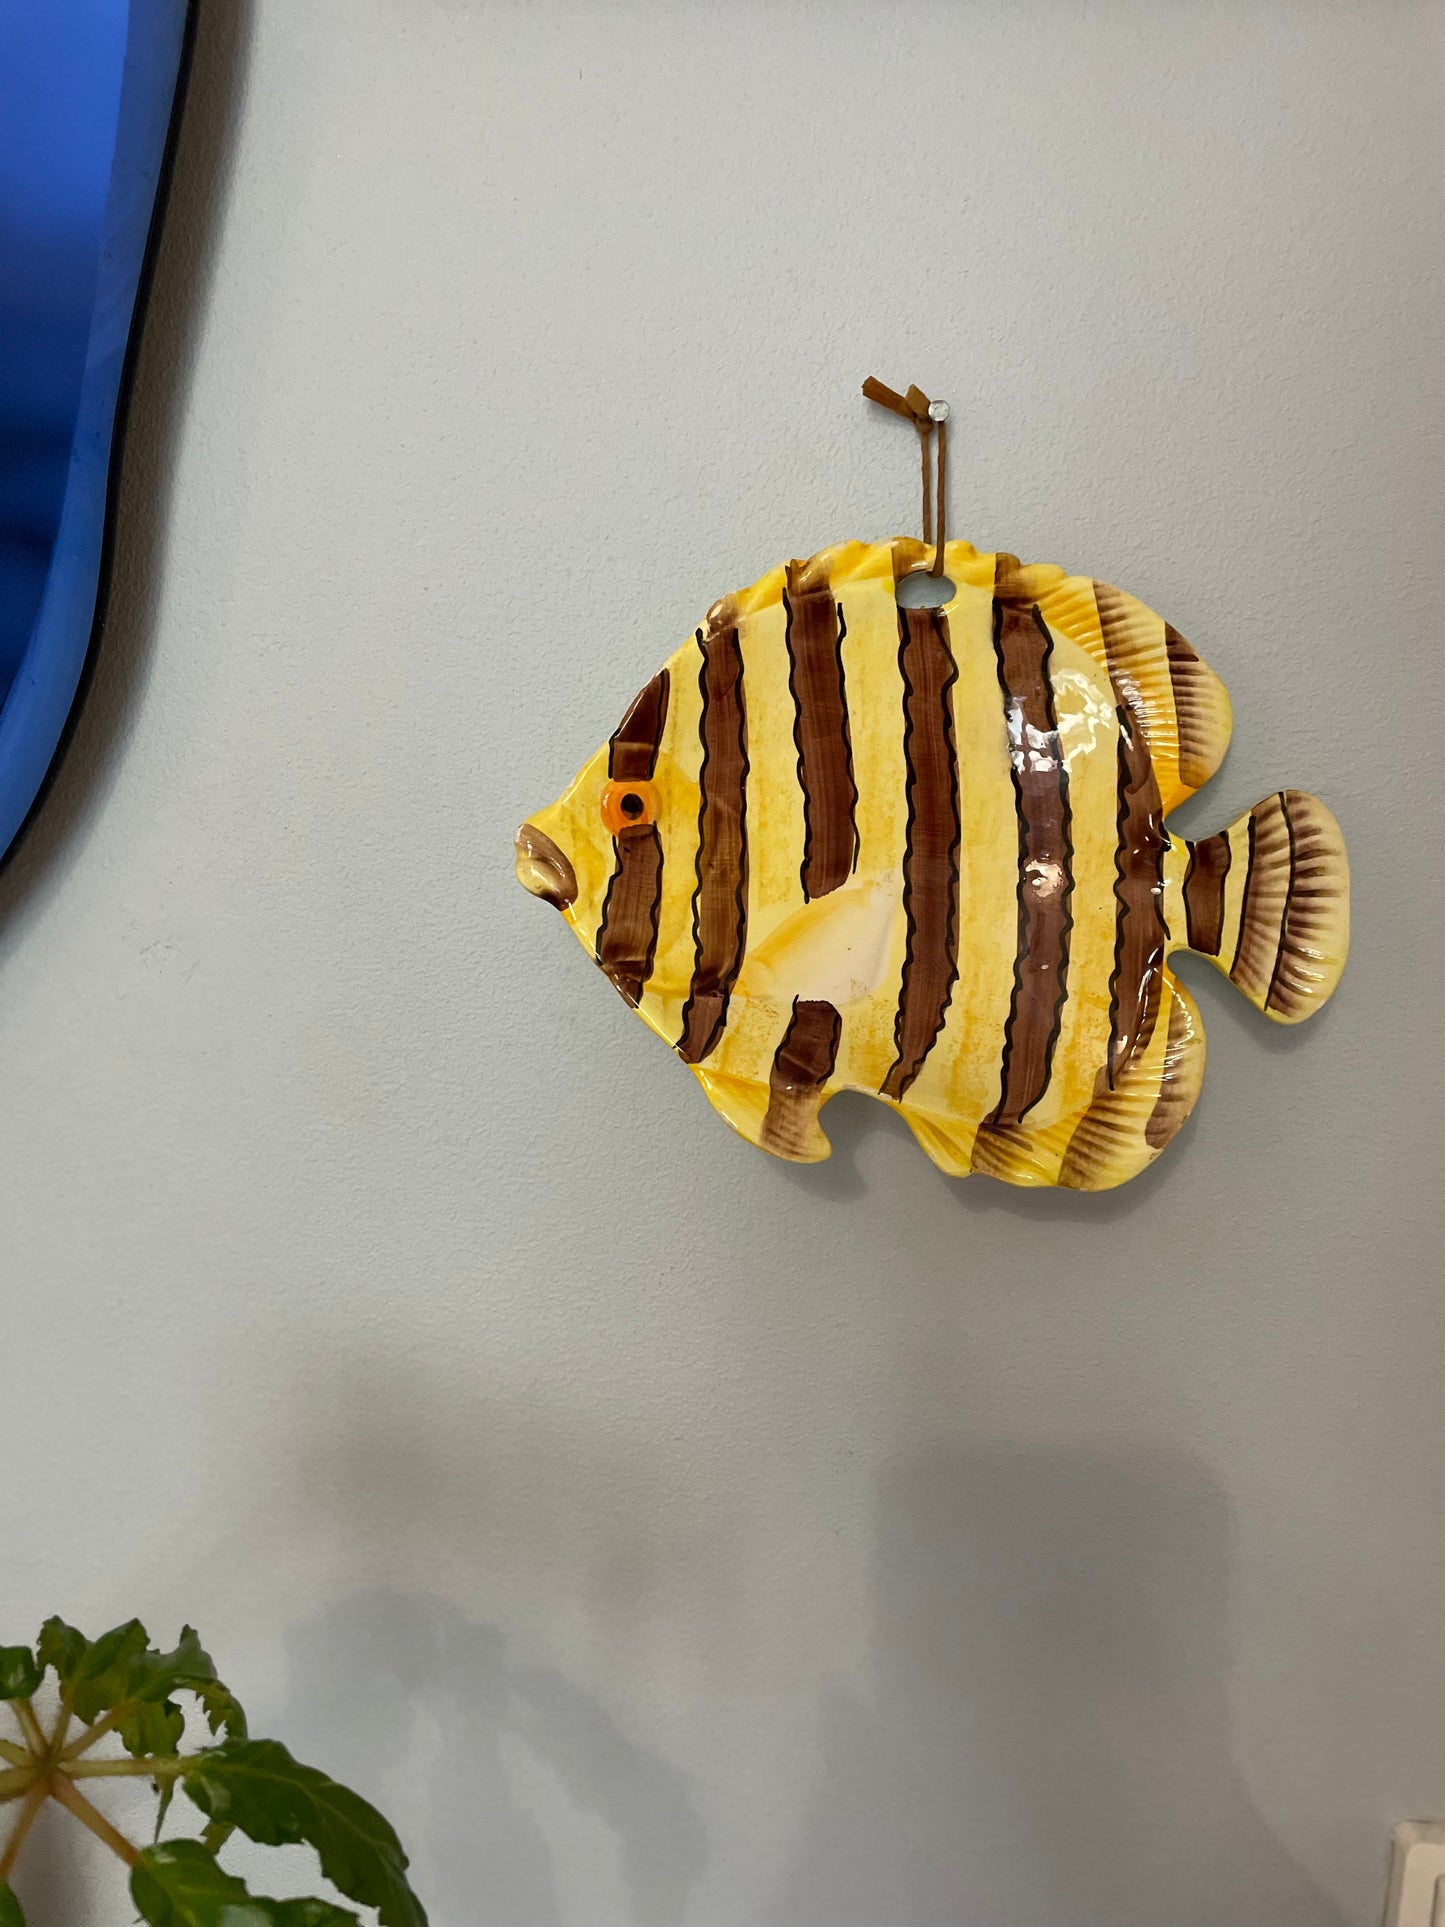 Adventurous fish as a dish or wall hanging